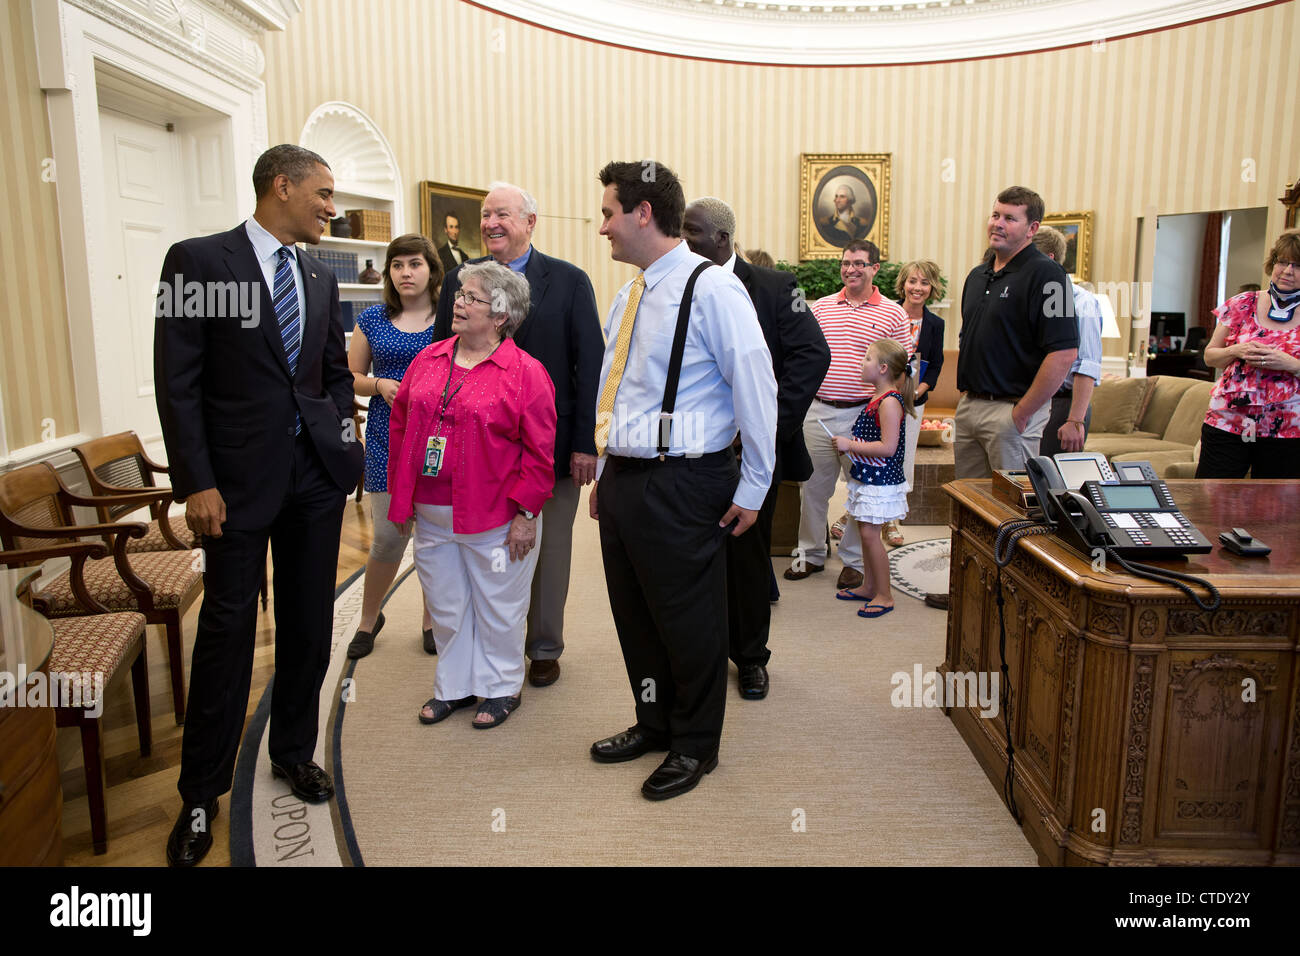 US President Barack Obama gives a tour of the Oval Office to Steve and Kappy Scates and their family, June 27, 2012 in Washington, DC. The Scates were early supporters of the President. Stock Photo